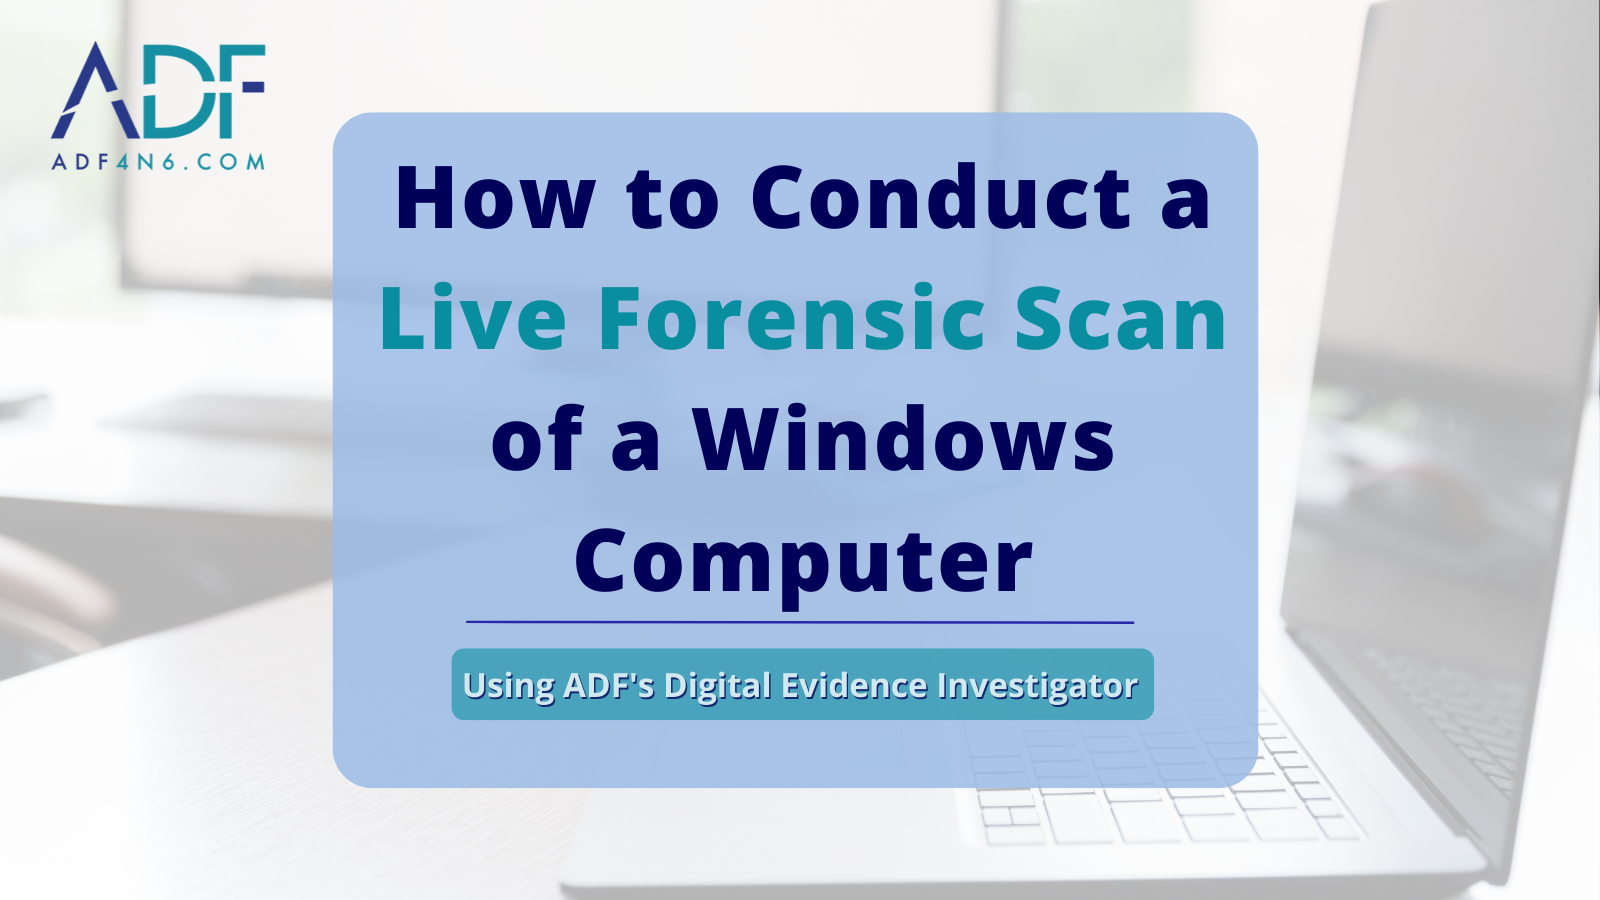 How to Conduct a Live Forensic Scan of a Windows Computer